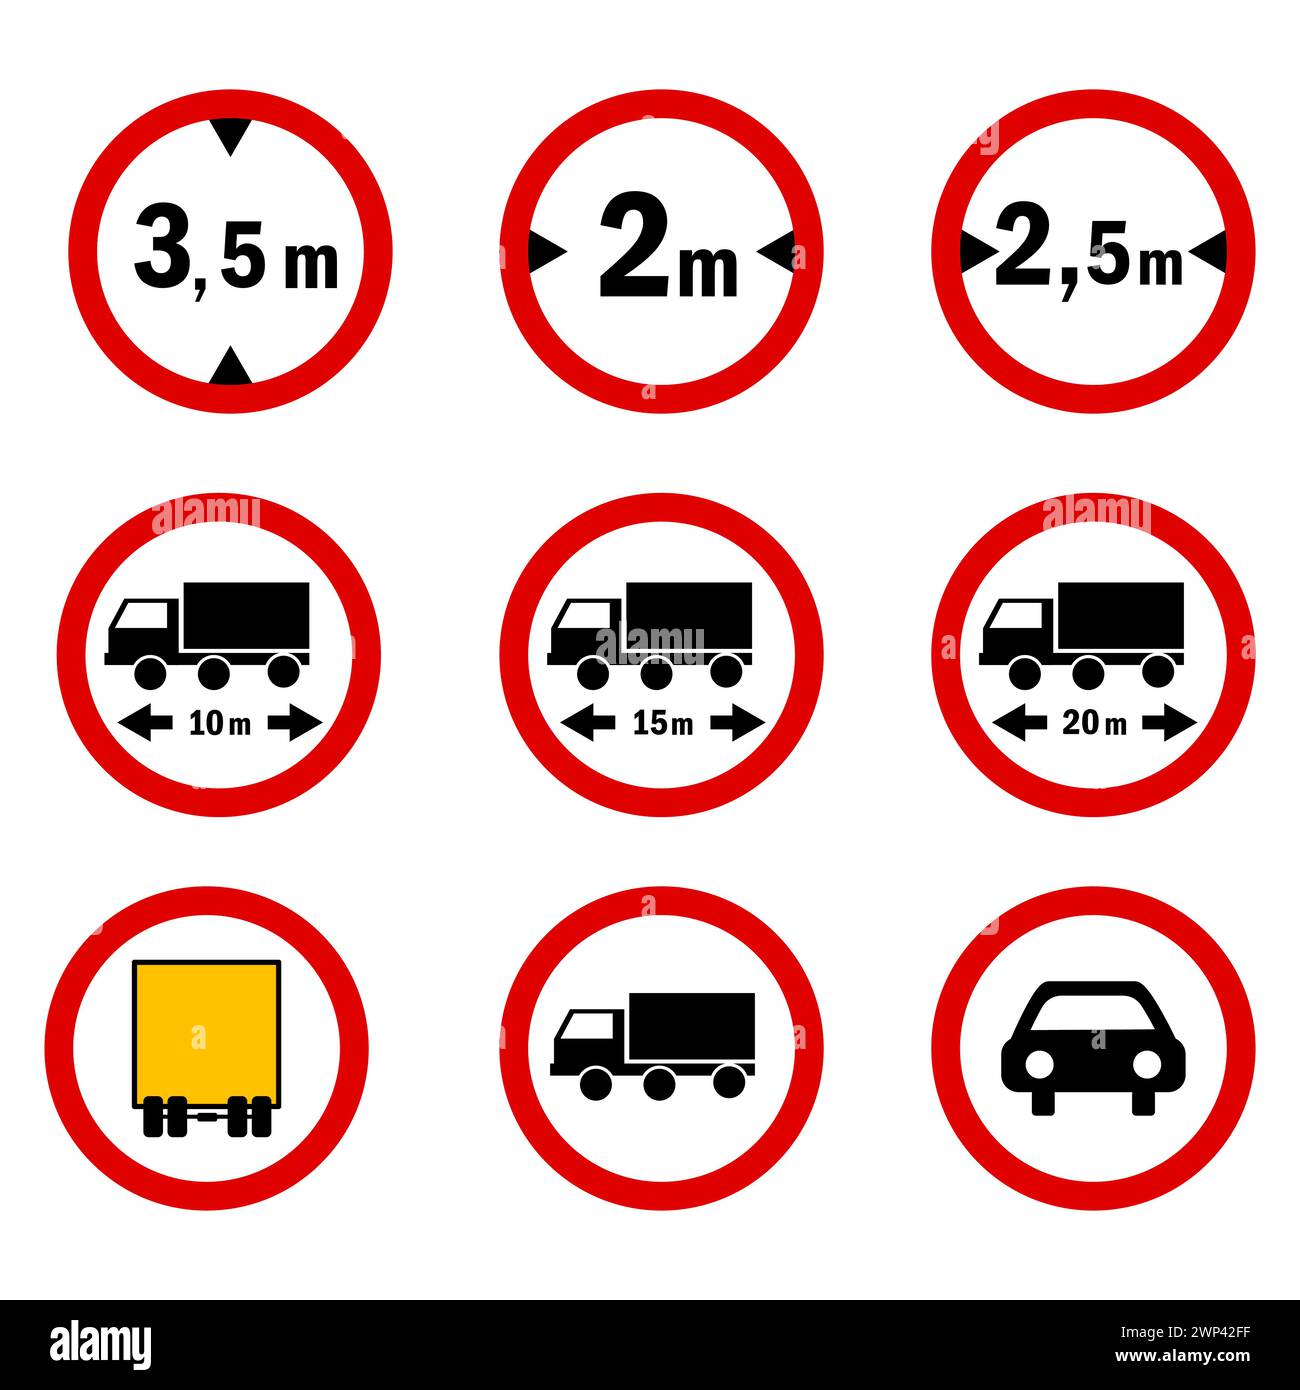 Prohibition road signs. Mandatory road signs. Traffic Laws. Vector illustration. stock image. EPS 10. Stock Vector